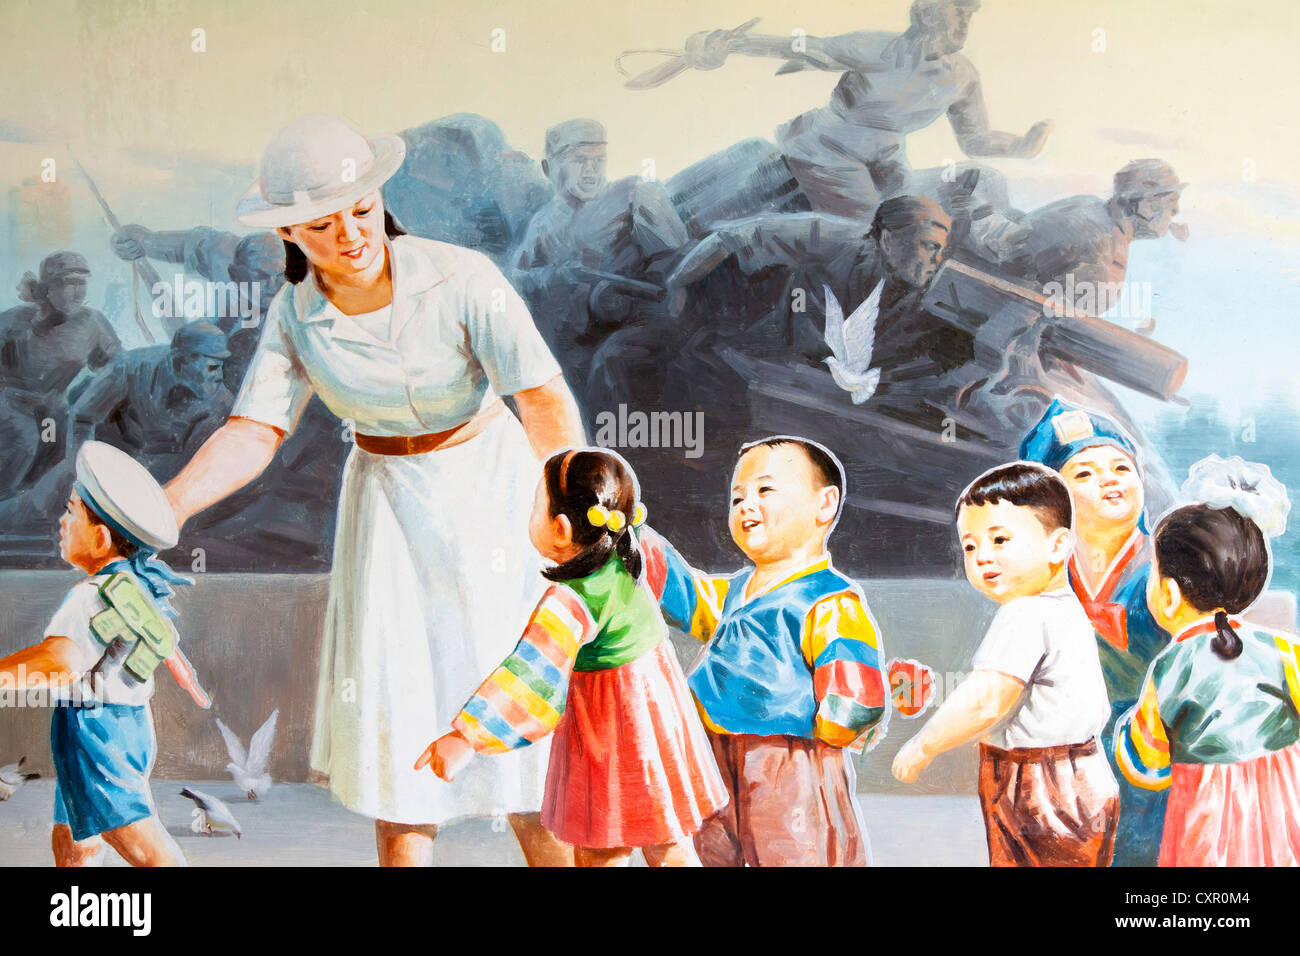 Democratic Peoples's Republic of Korea (DPRK), North Korea, poster at the Nampo Orphanage Stock Photo